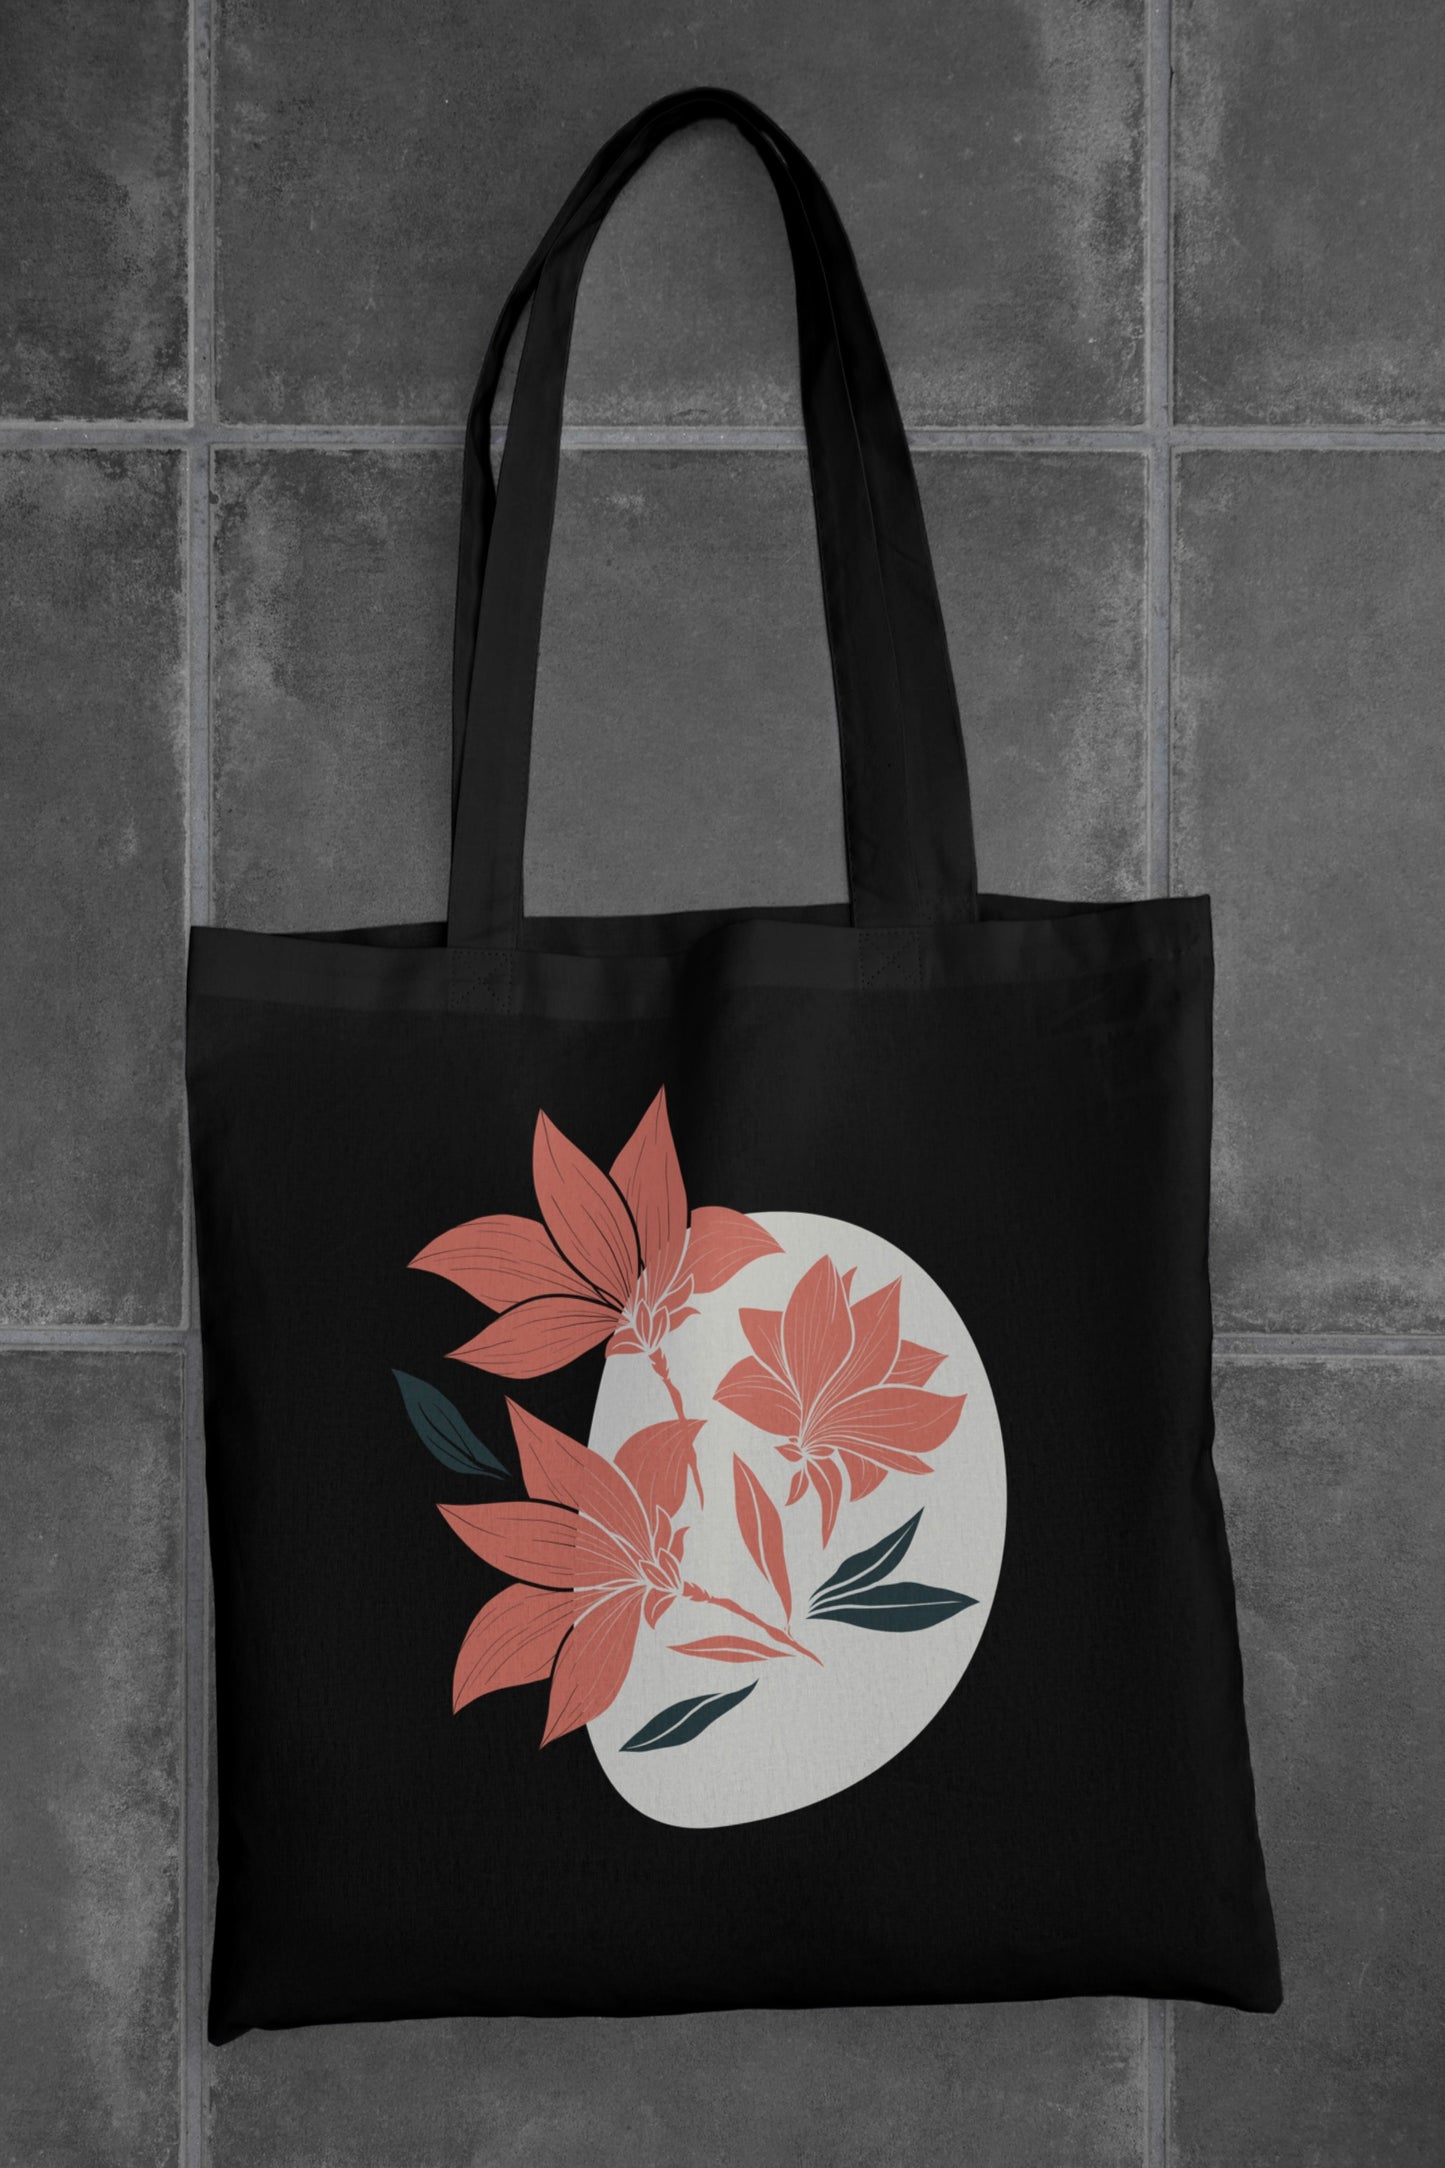 Black/White Aesthetic Flowers Tote Bag with Zipper